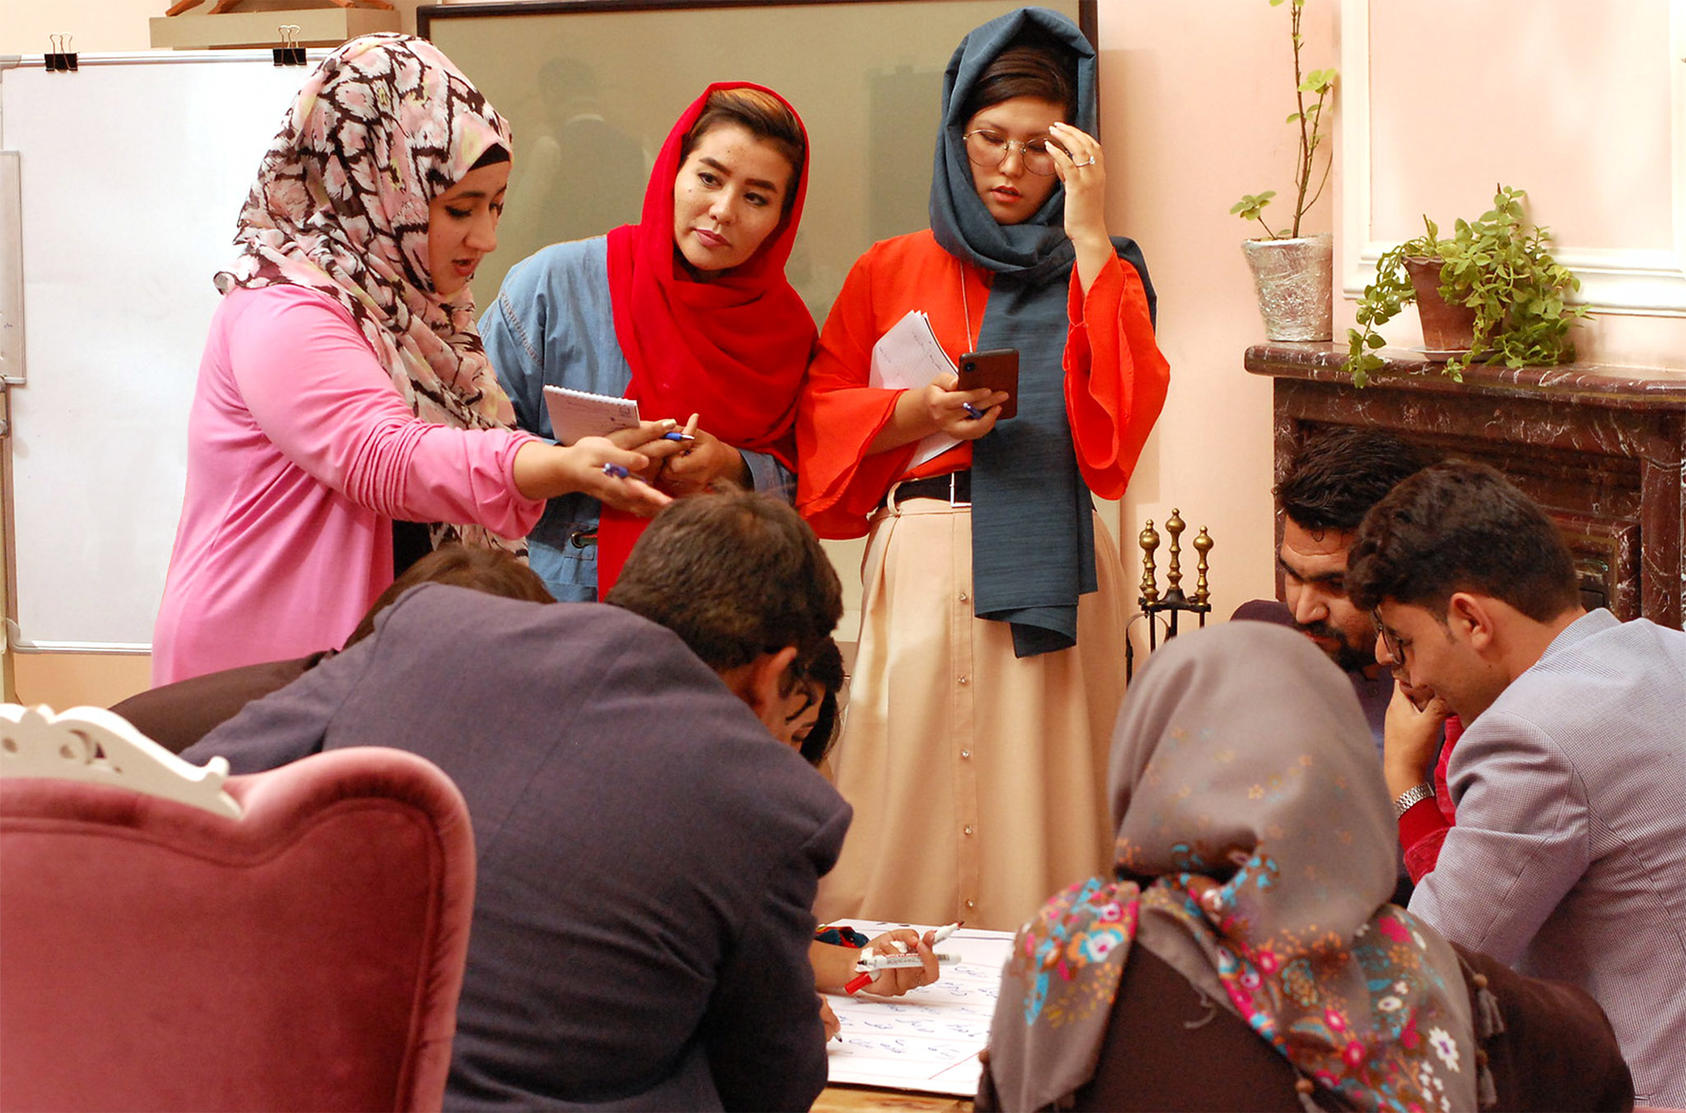 Afghans in the city of Mazar-i-Sharif discuss ways to build a national consensus on protecting women’s rights in peace talks with the Taliban. The dialogue was one of a series hosted by USIP to broaden roles of women and youth in the peace process.